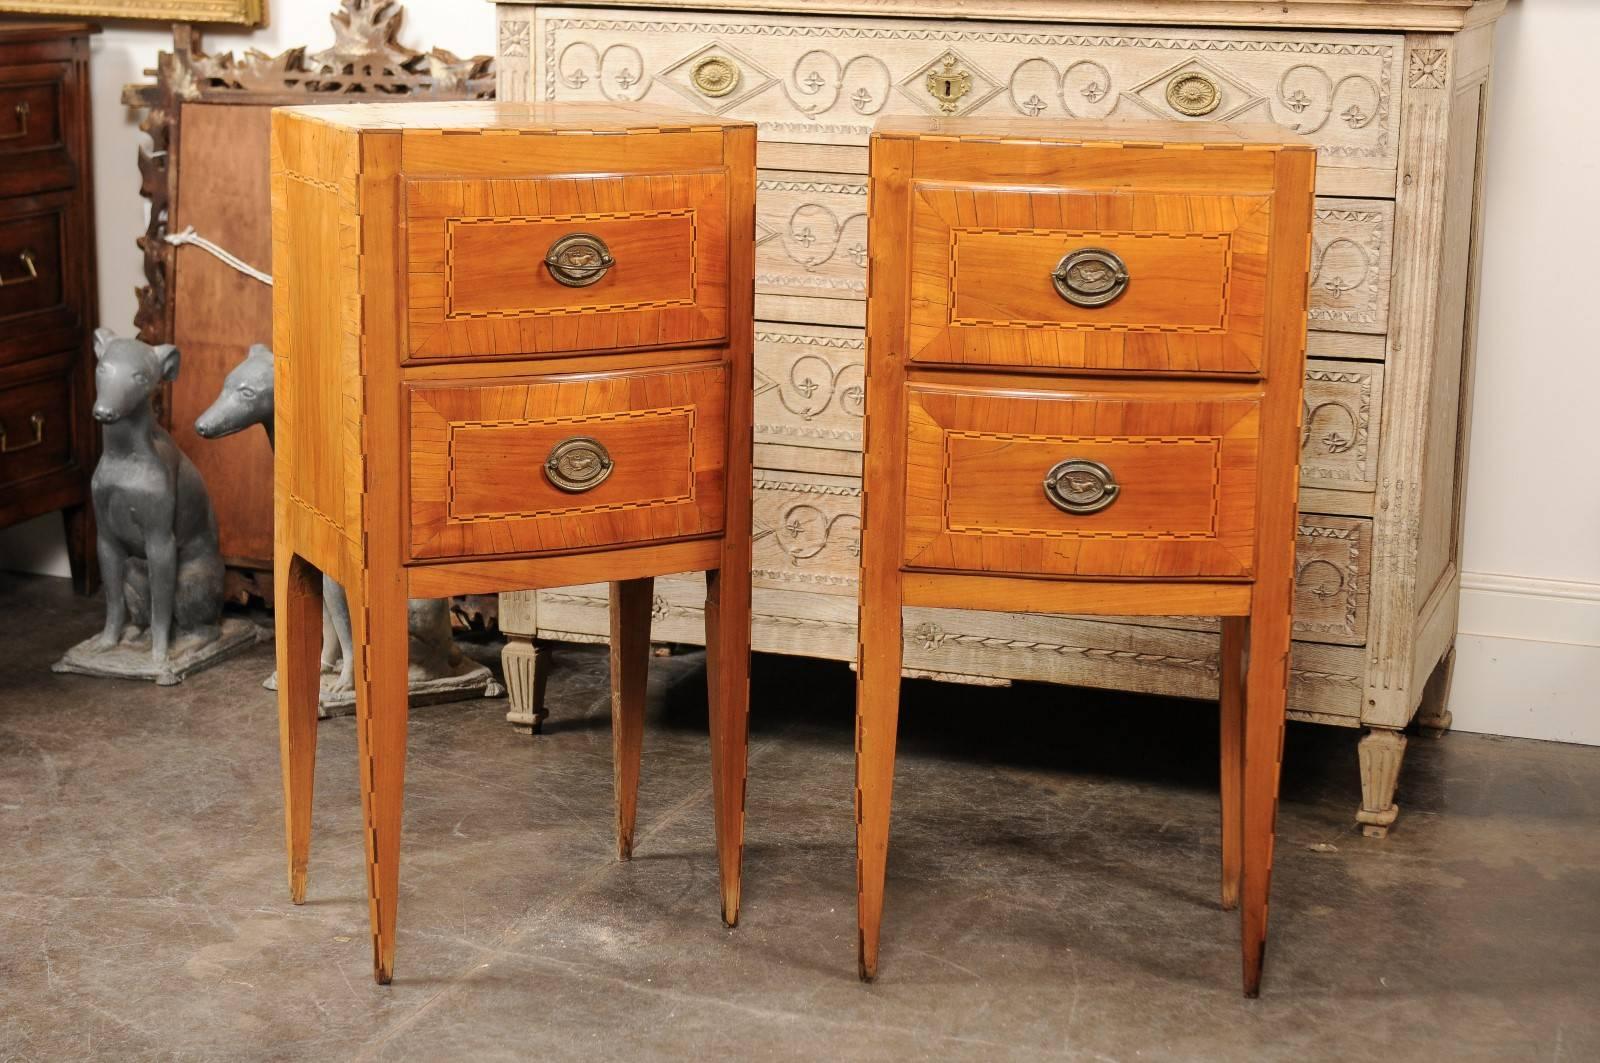 This pair of Austrian Biedermeier petite commodes from the mid-19th century features exquisite veneered tops with rectangular banding over two small drawers. Each central oval mounted plate with bail handle is surrounded by a delicate banding,